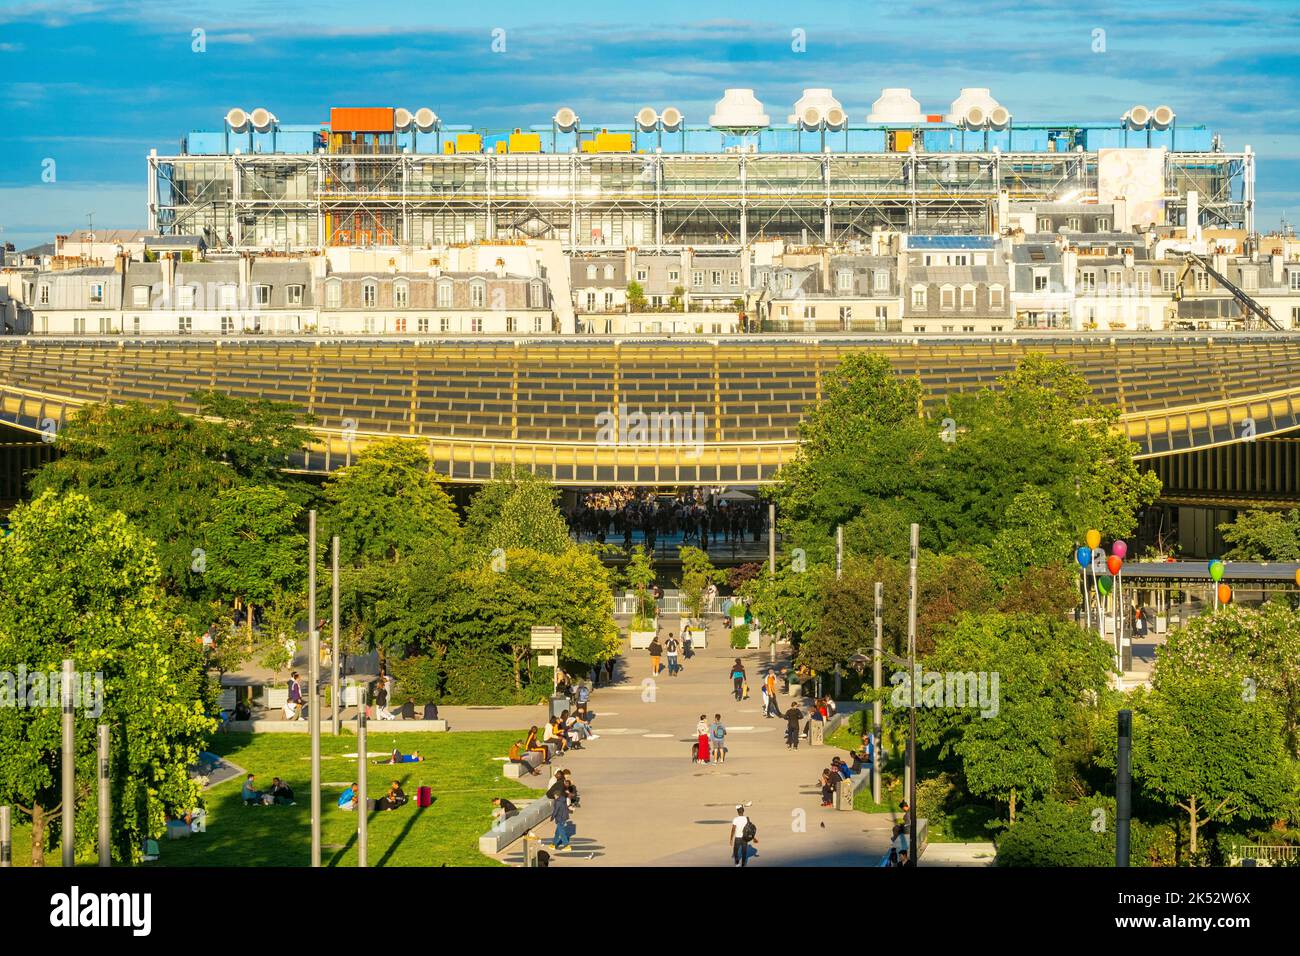 France, Paris, the canonry of the Forum des Halles and the Georges Pompidou center Stock Photo